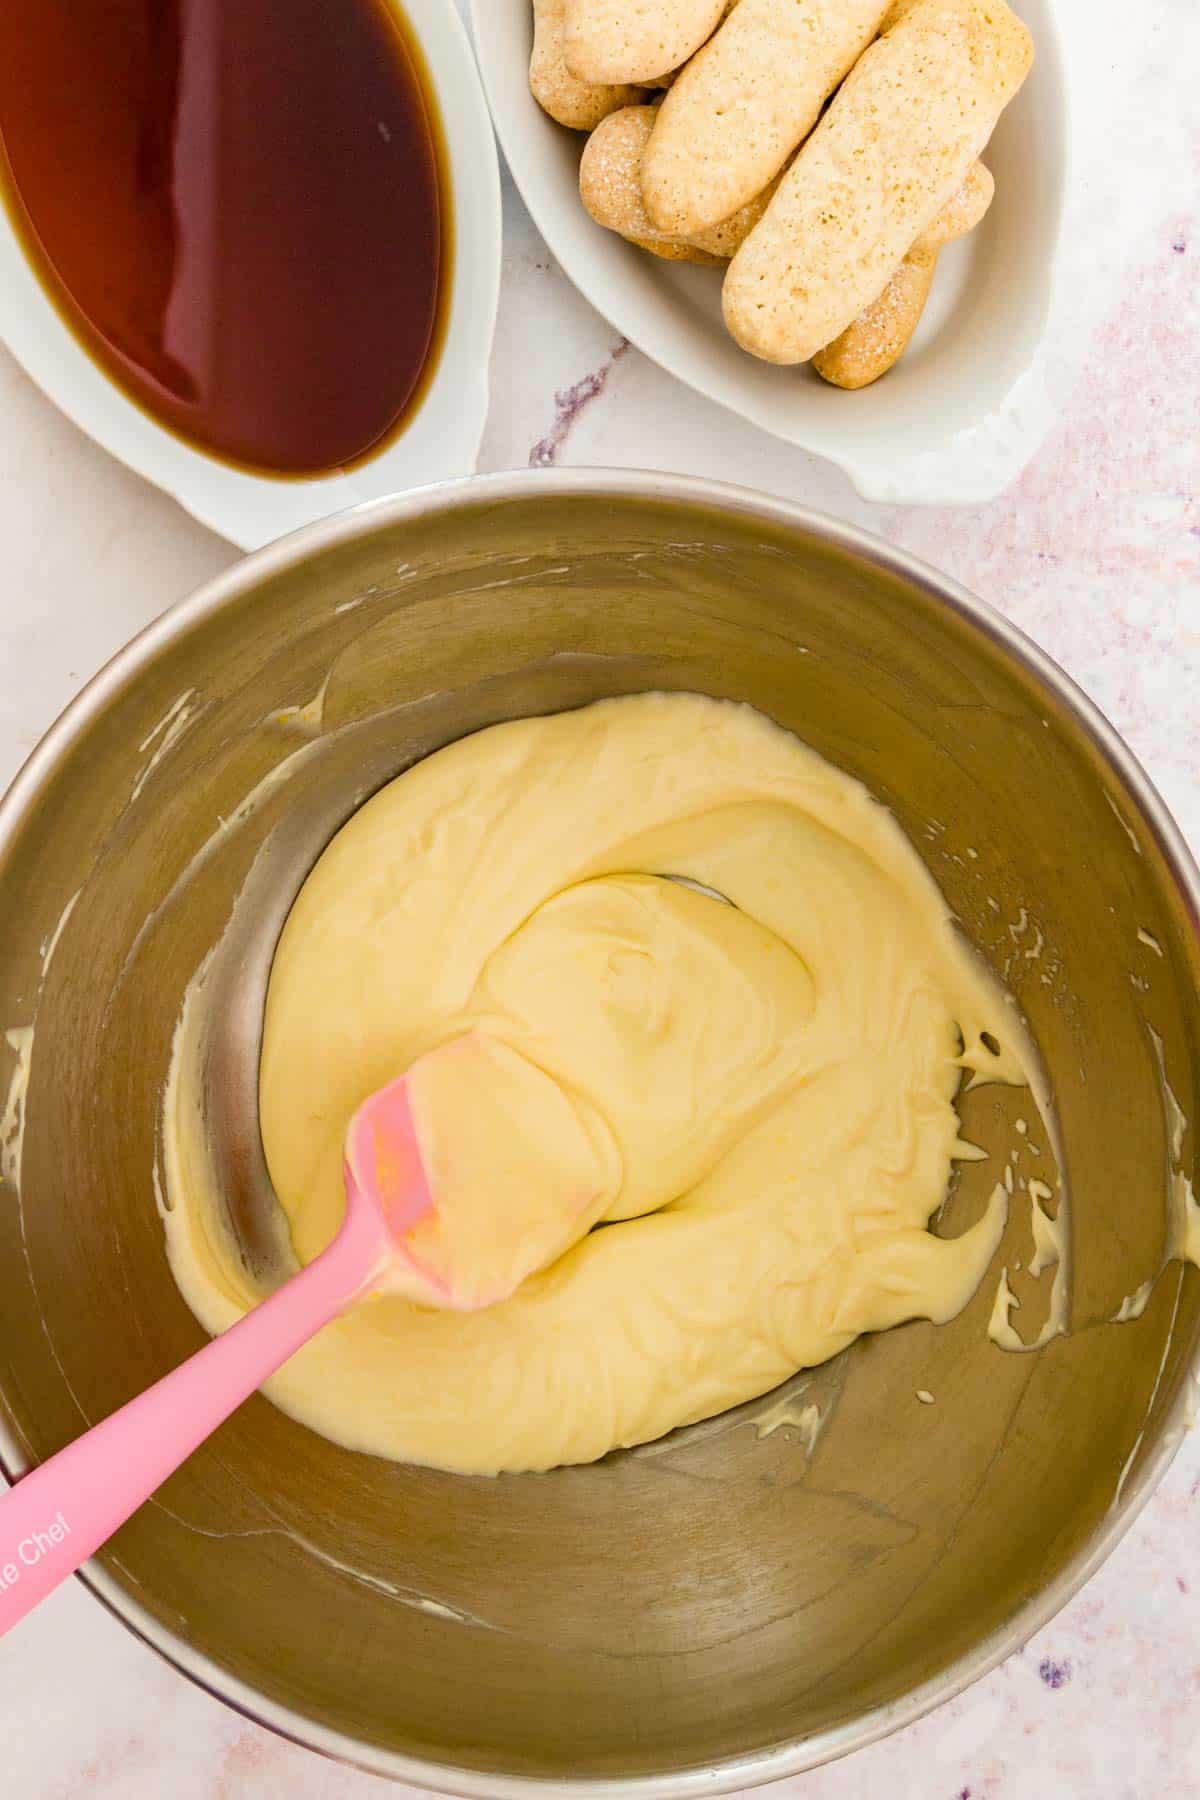 Egg yolks are stirred into the mascarpone mixture in a metal mixing bowl.